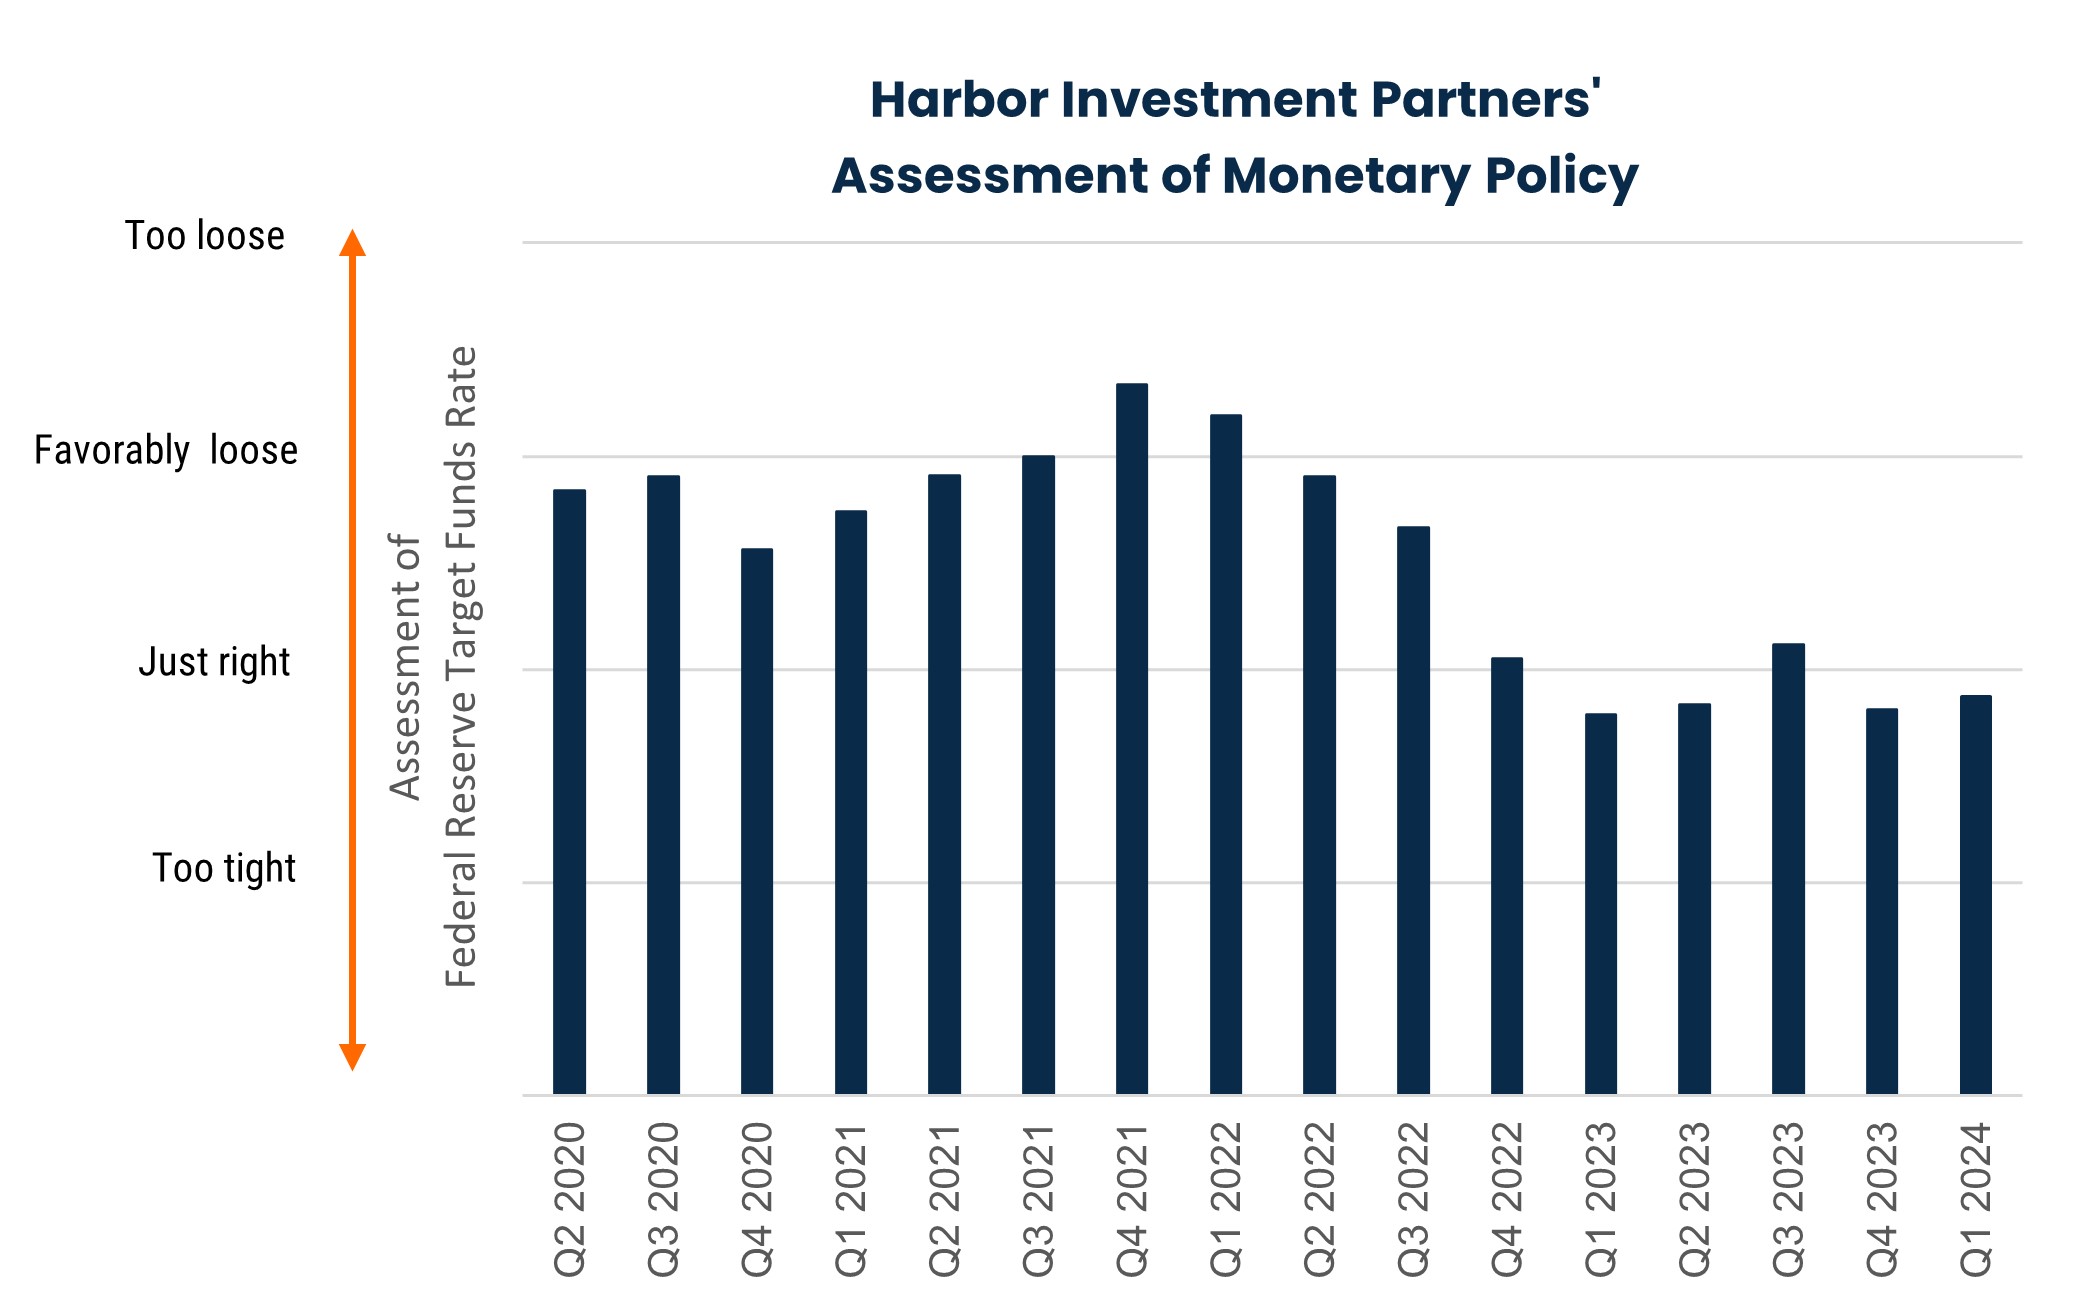 Harbor Investment Partners' Assessment of Monetary Policy